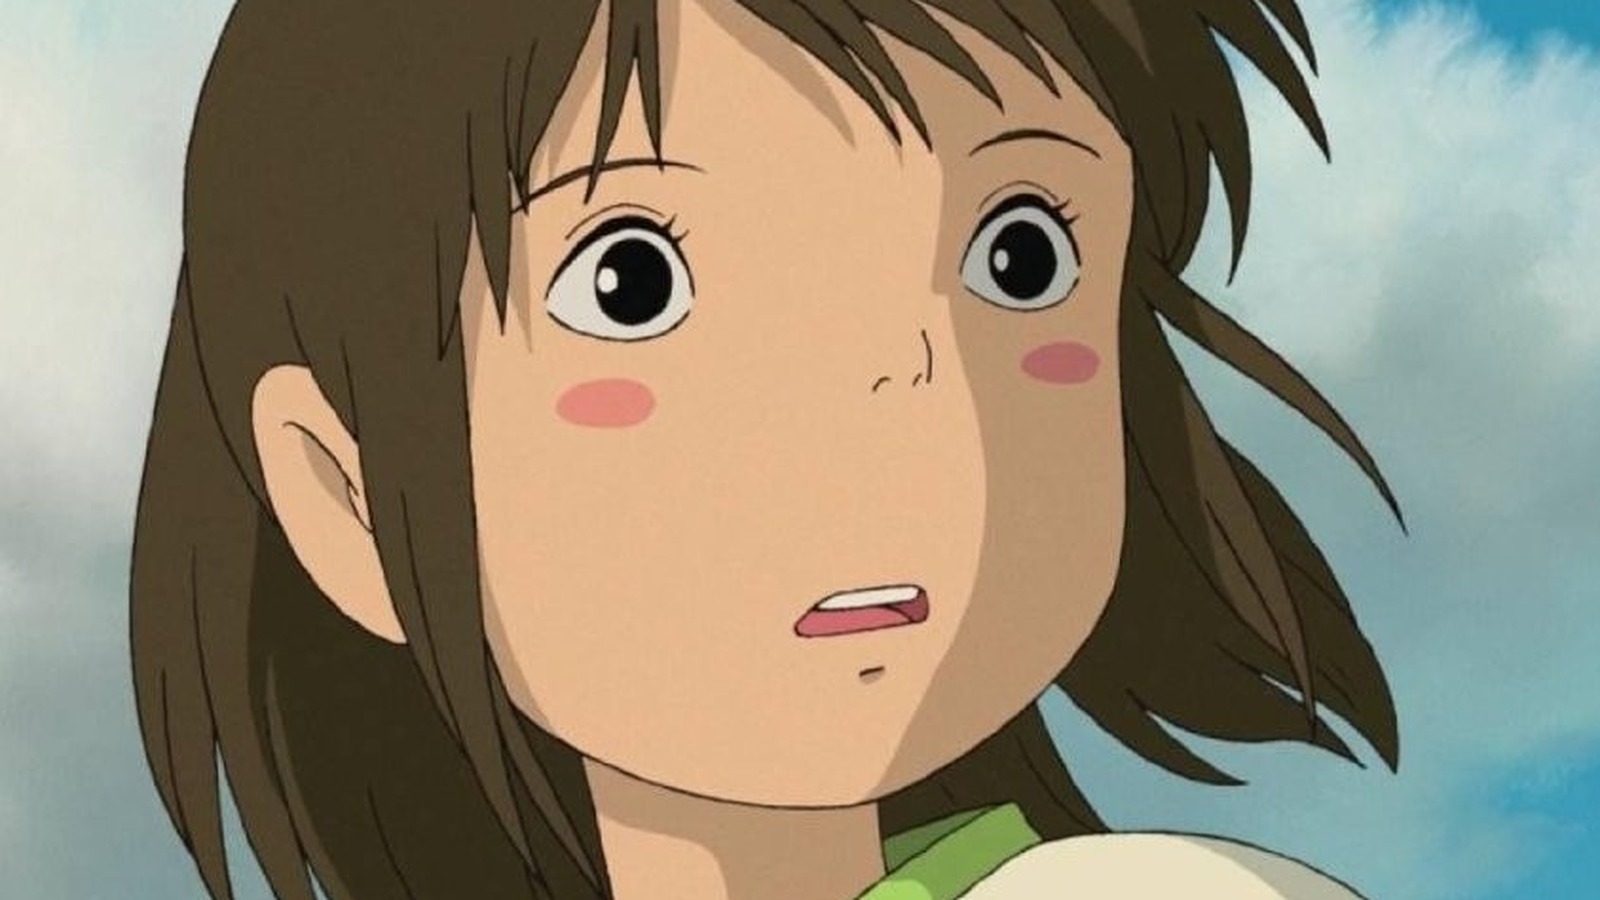 The Grim Spirited Away Theory That Would Put A Dark Spin On The Film 